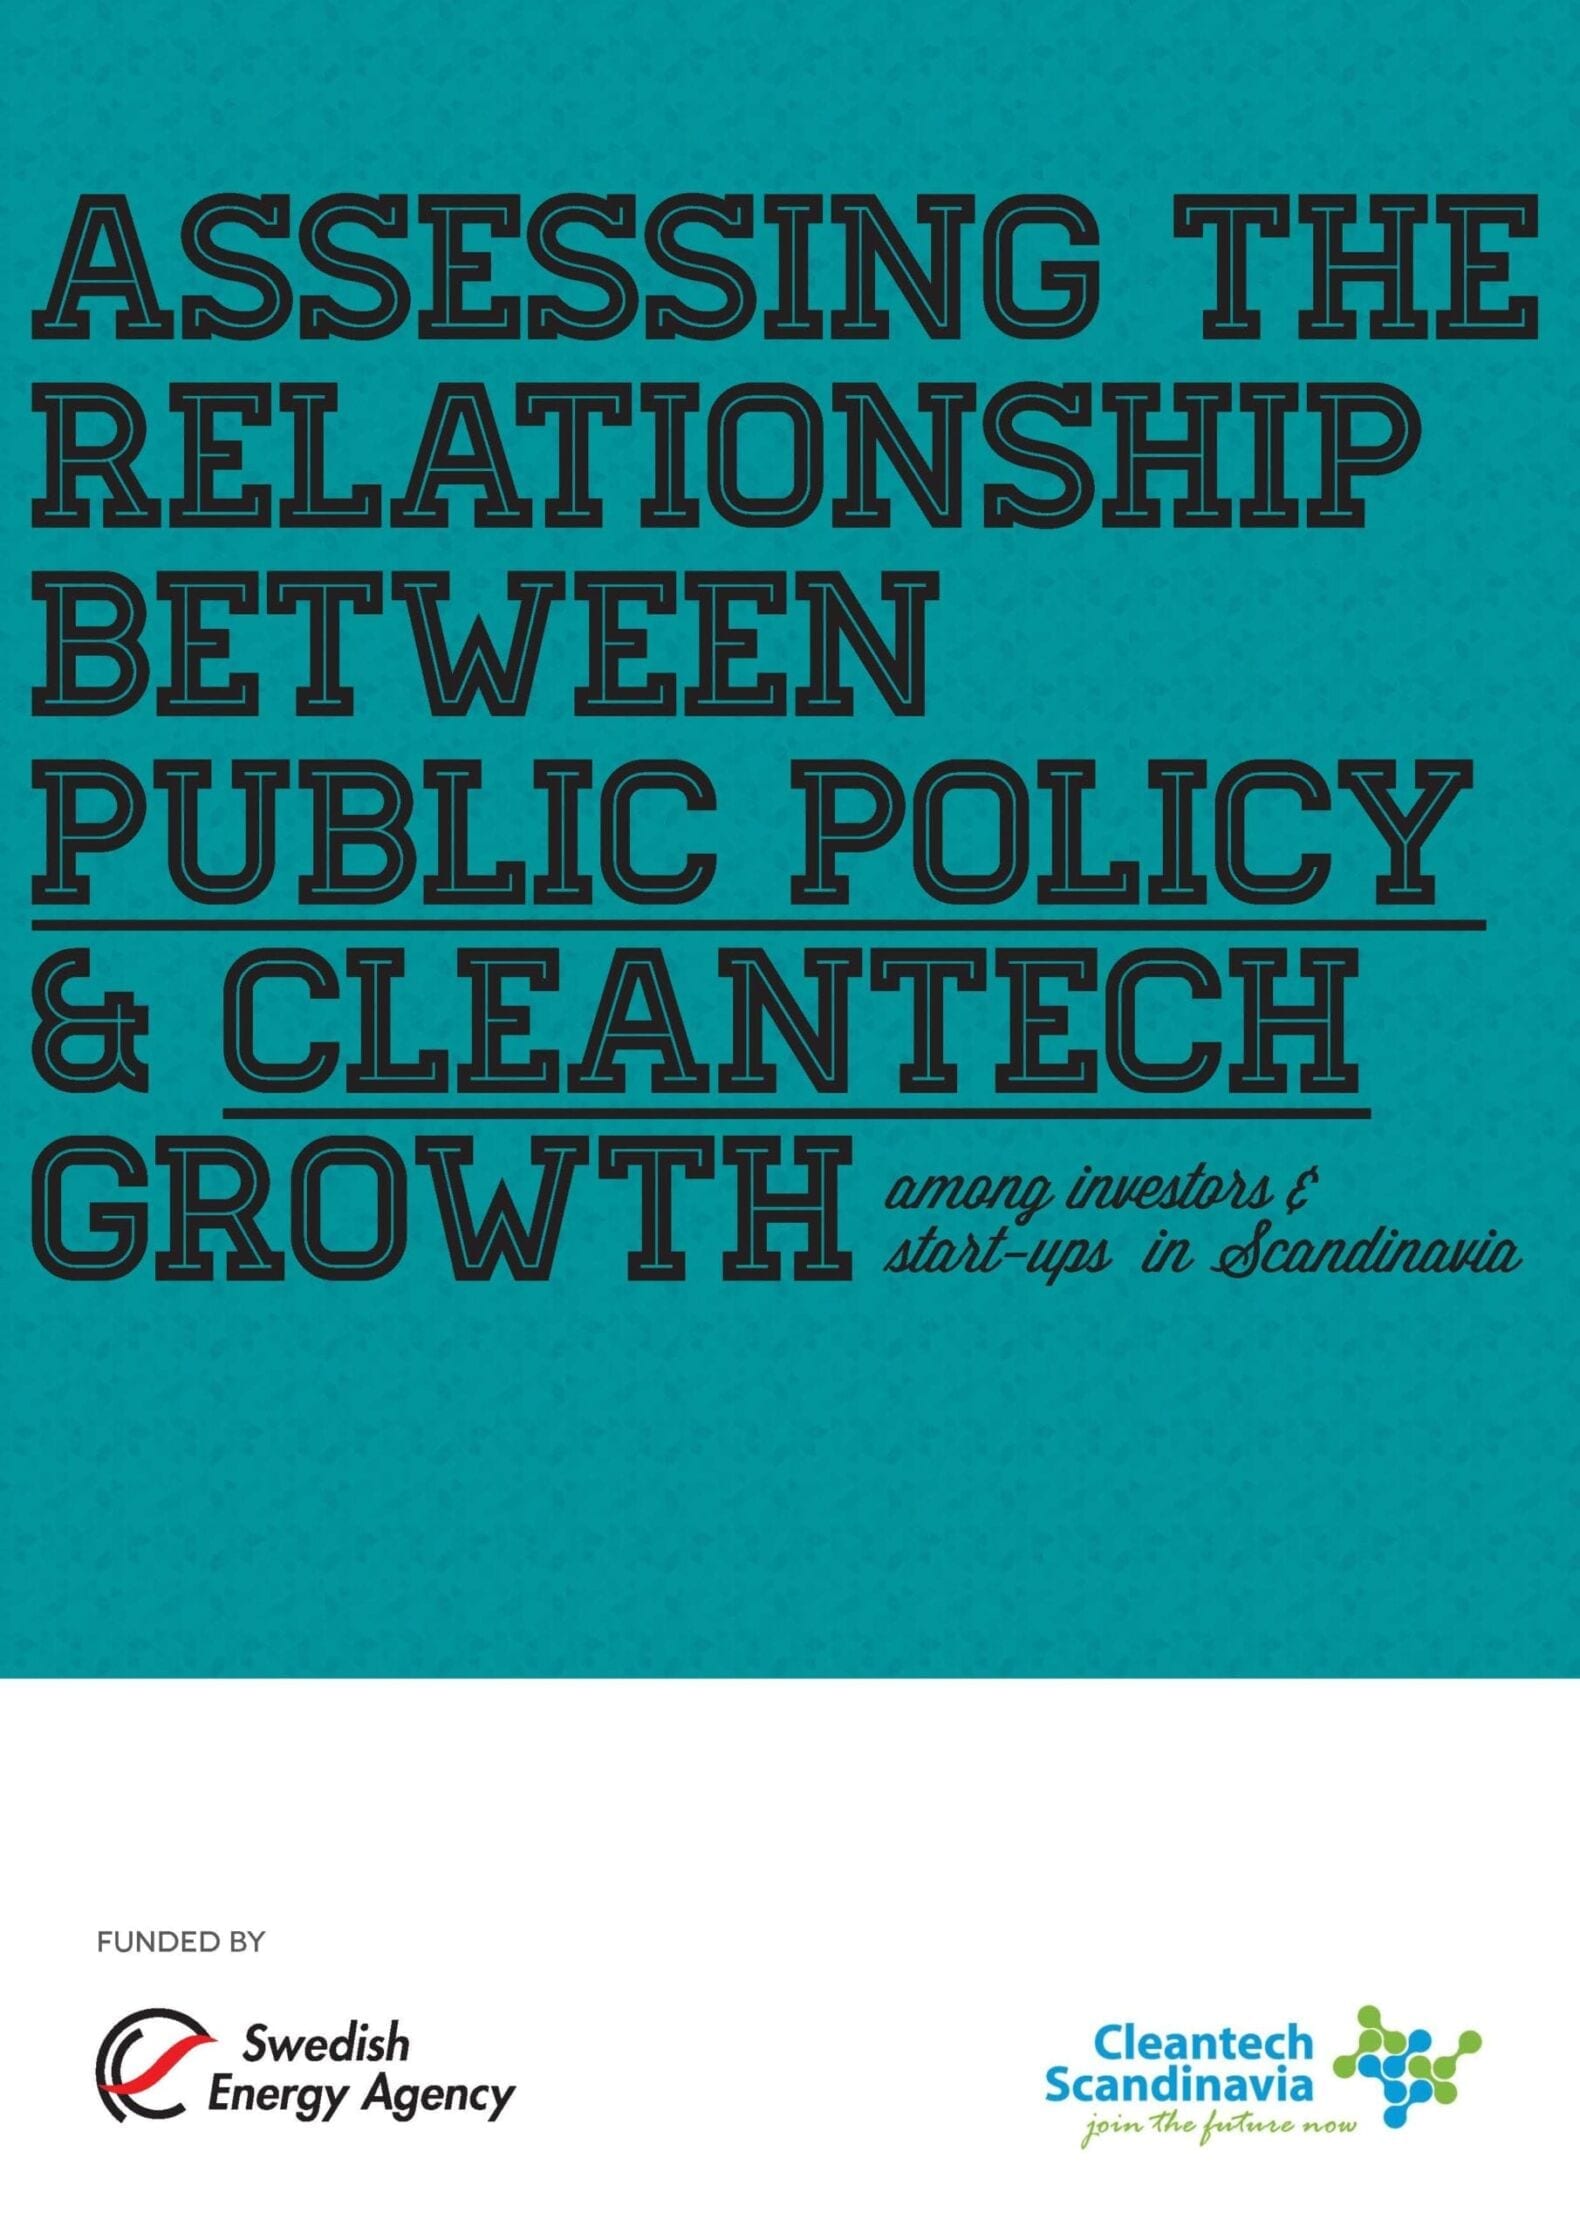 Public Policy & Cleantech Growth